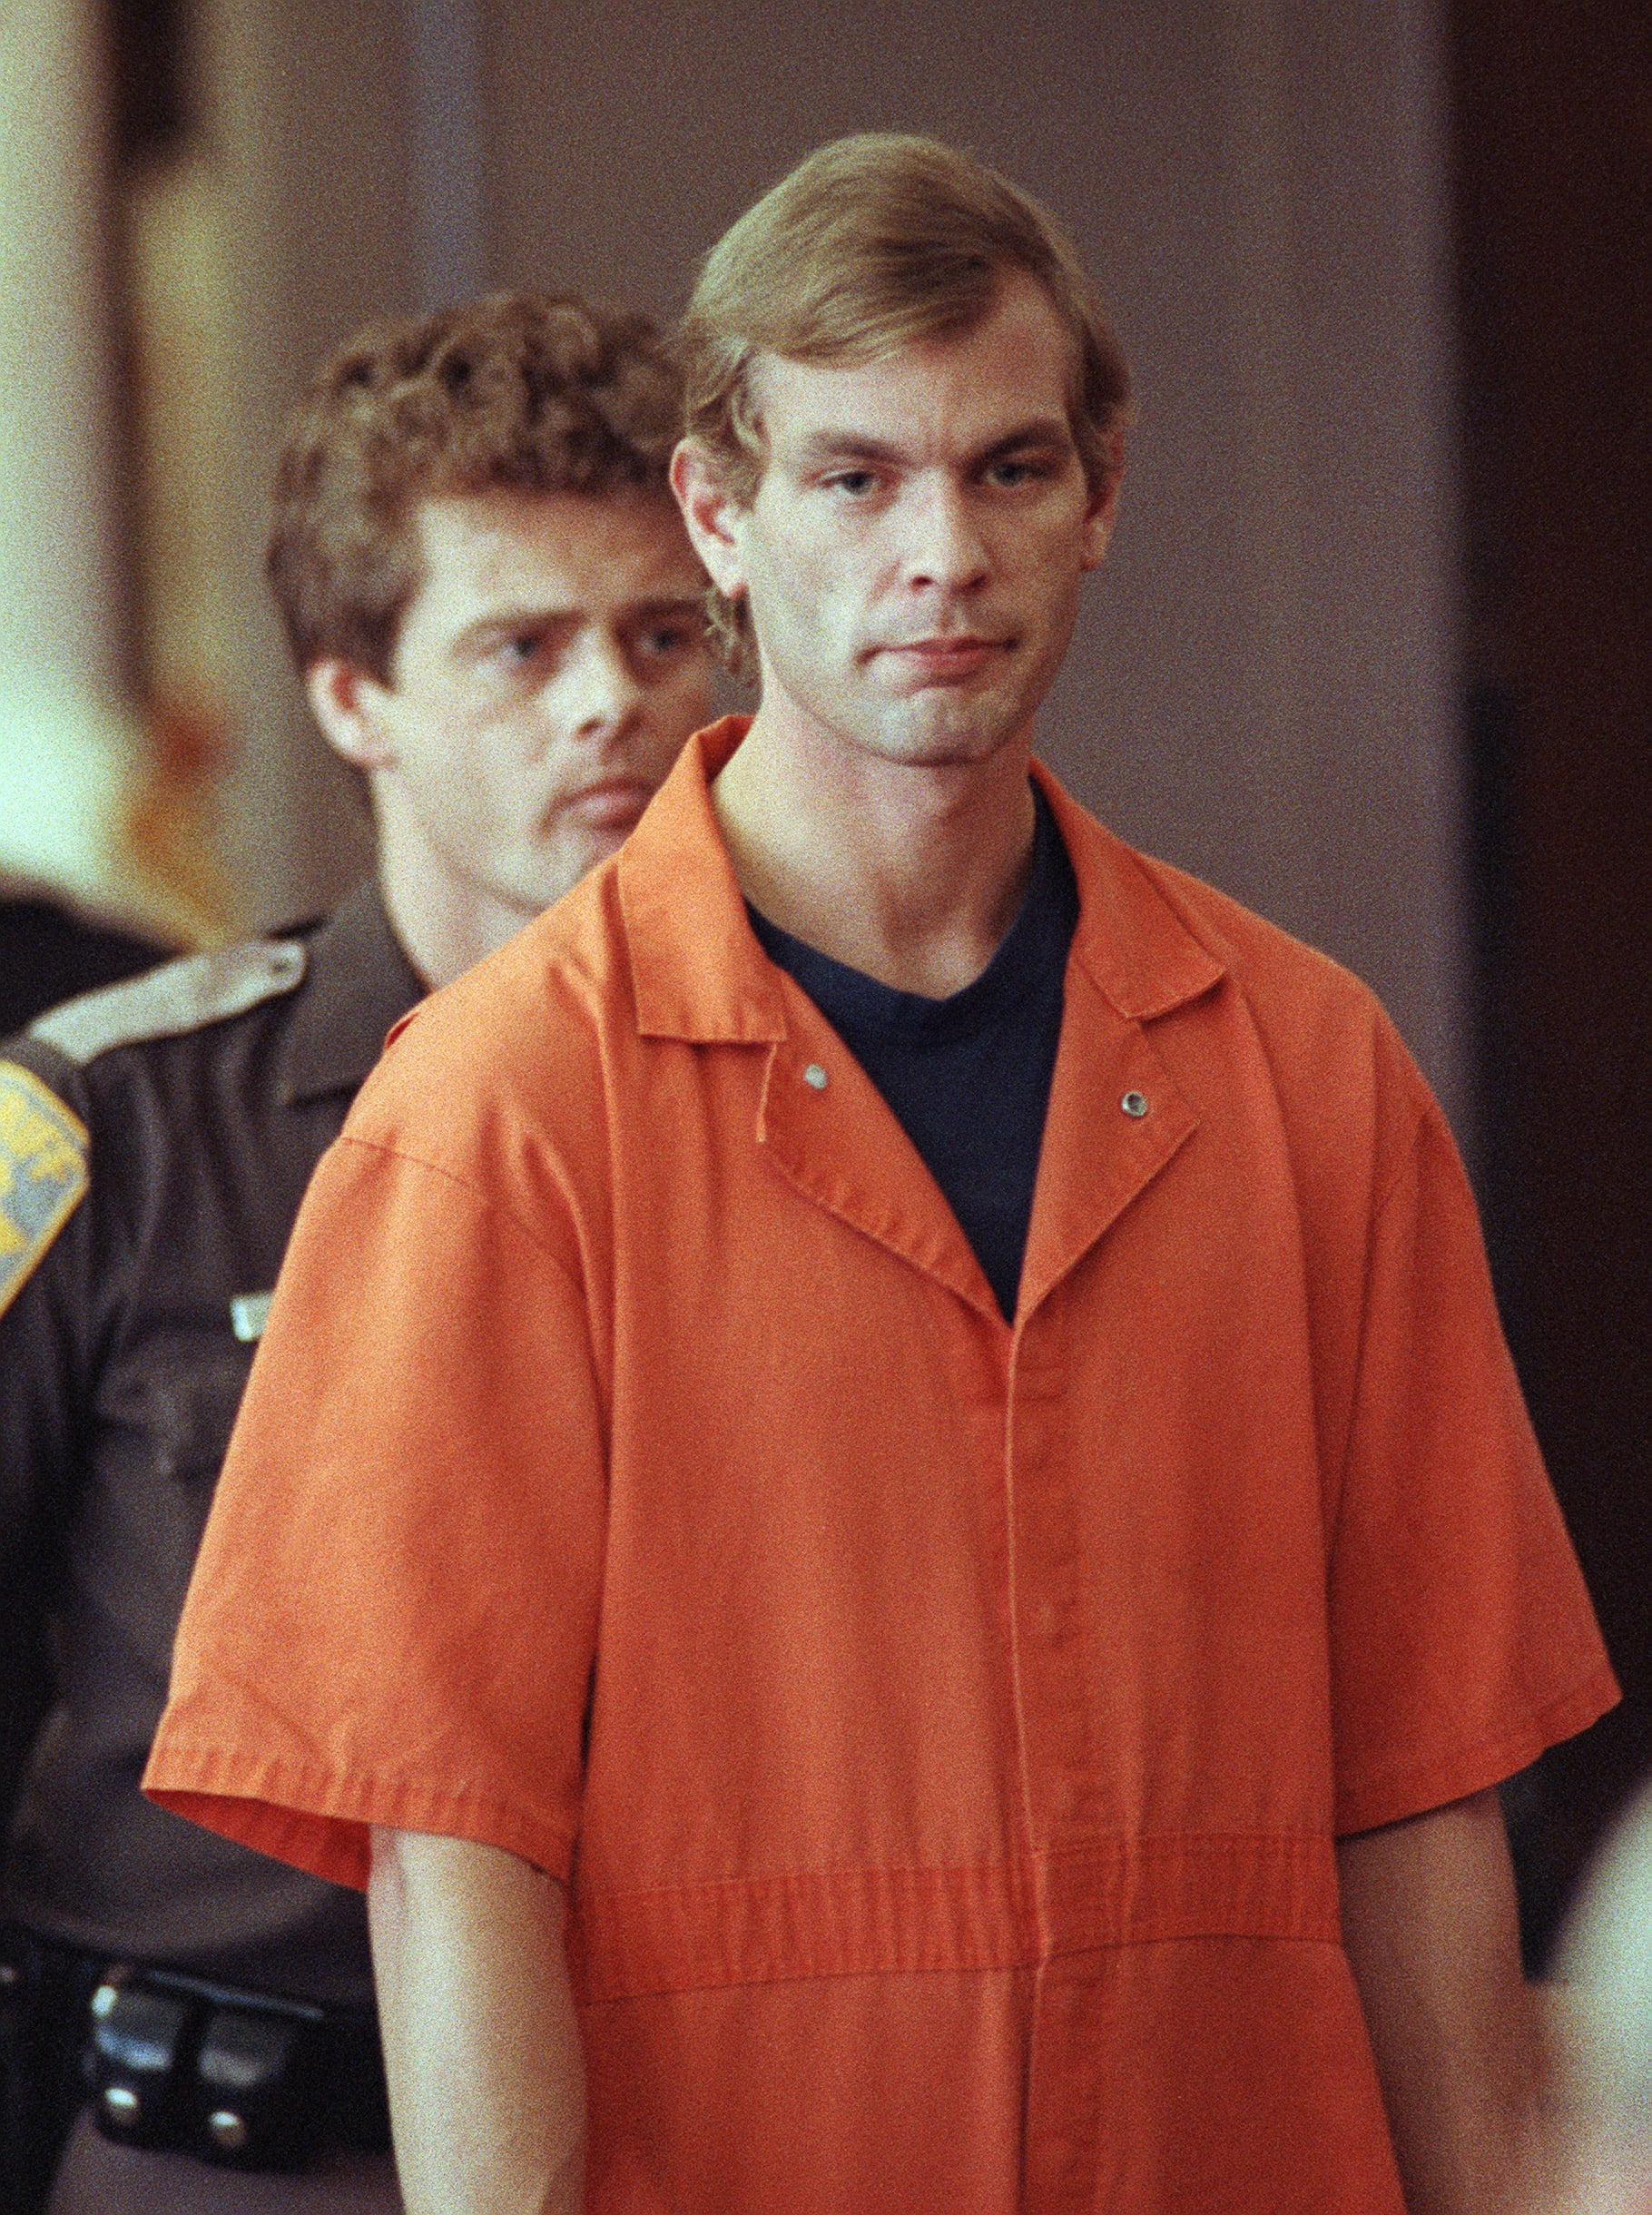 Jeffrey L. Dahmer in a Milwaukee, WI courtroom in August 1991.